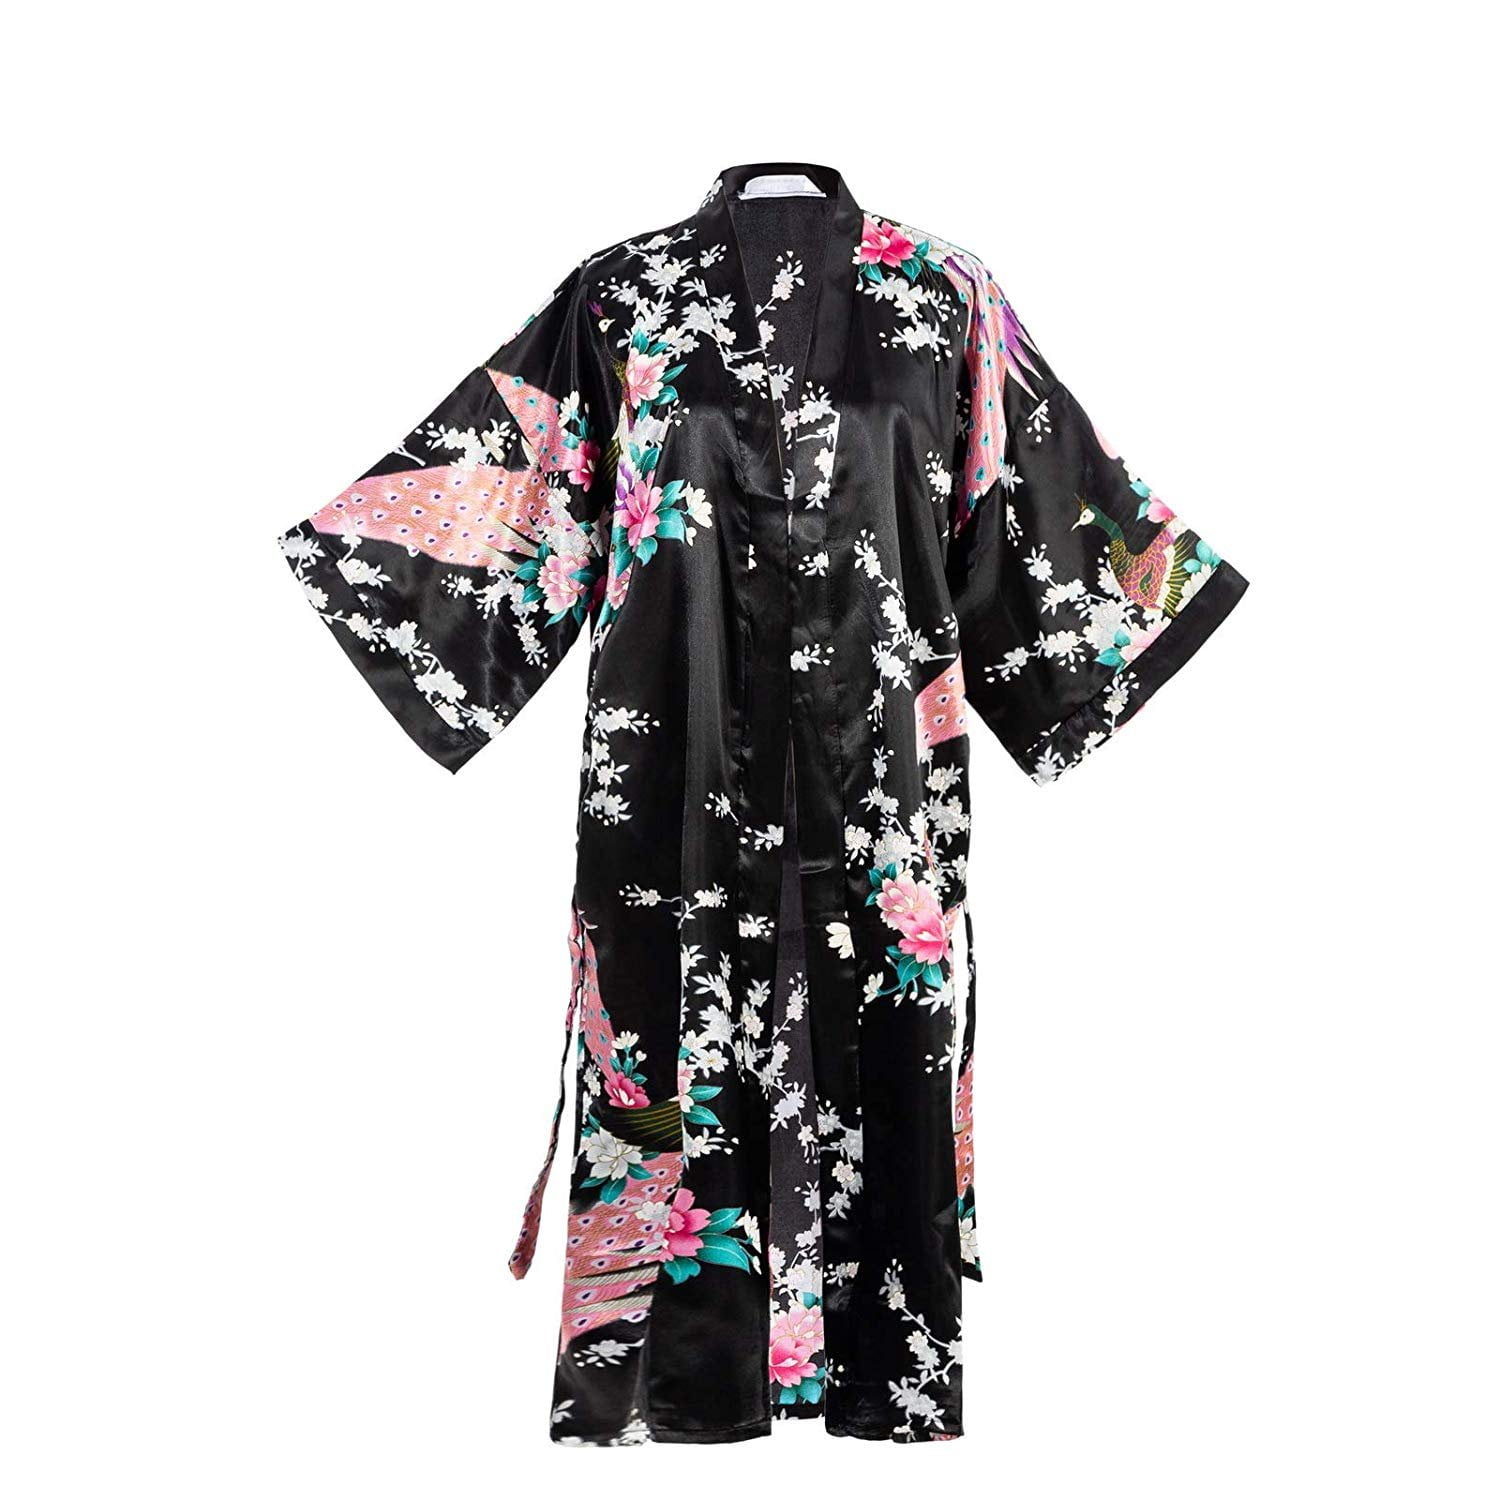 Yying Girls Satin Kimono Robe Peacock and Blossoms Bathrobes Dressing Gown for SPA Wedding Birthday 